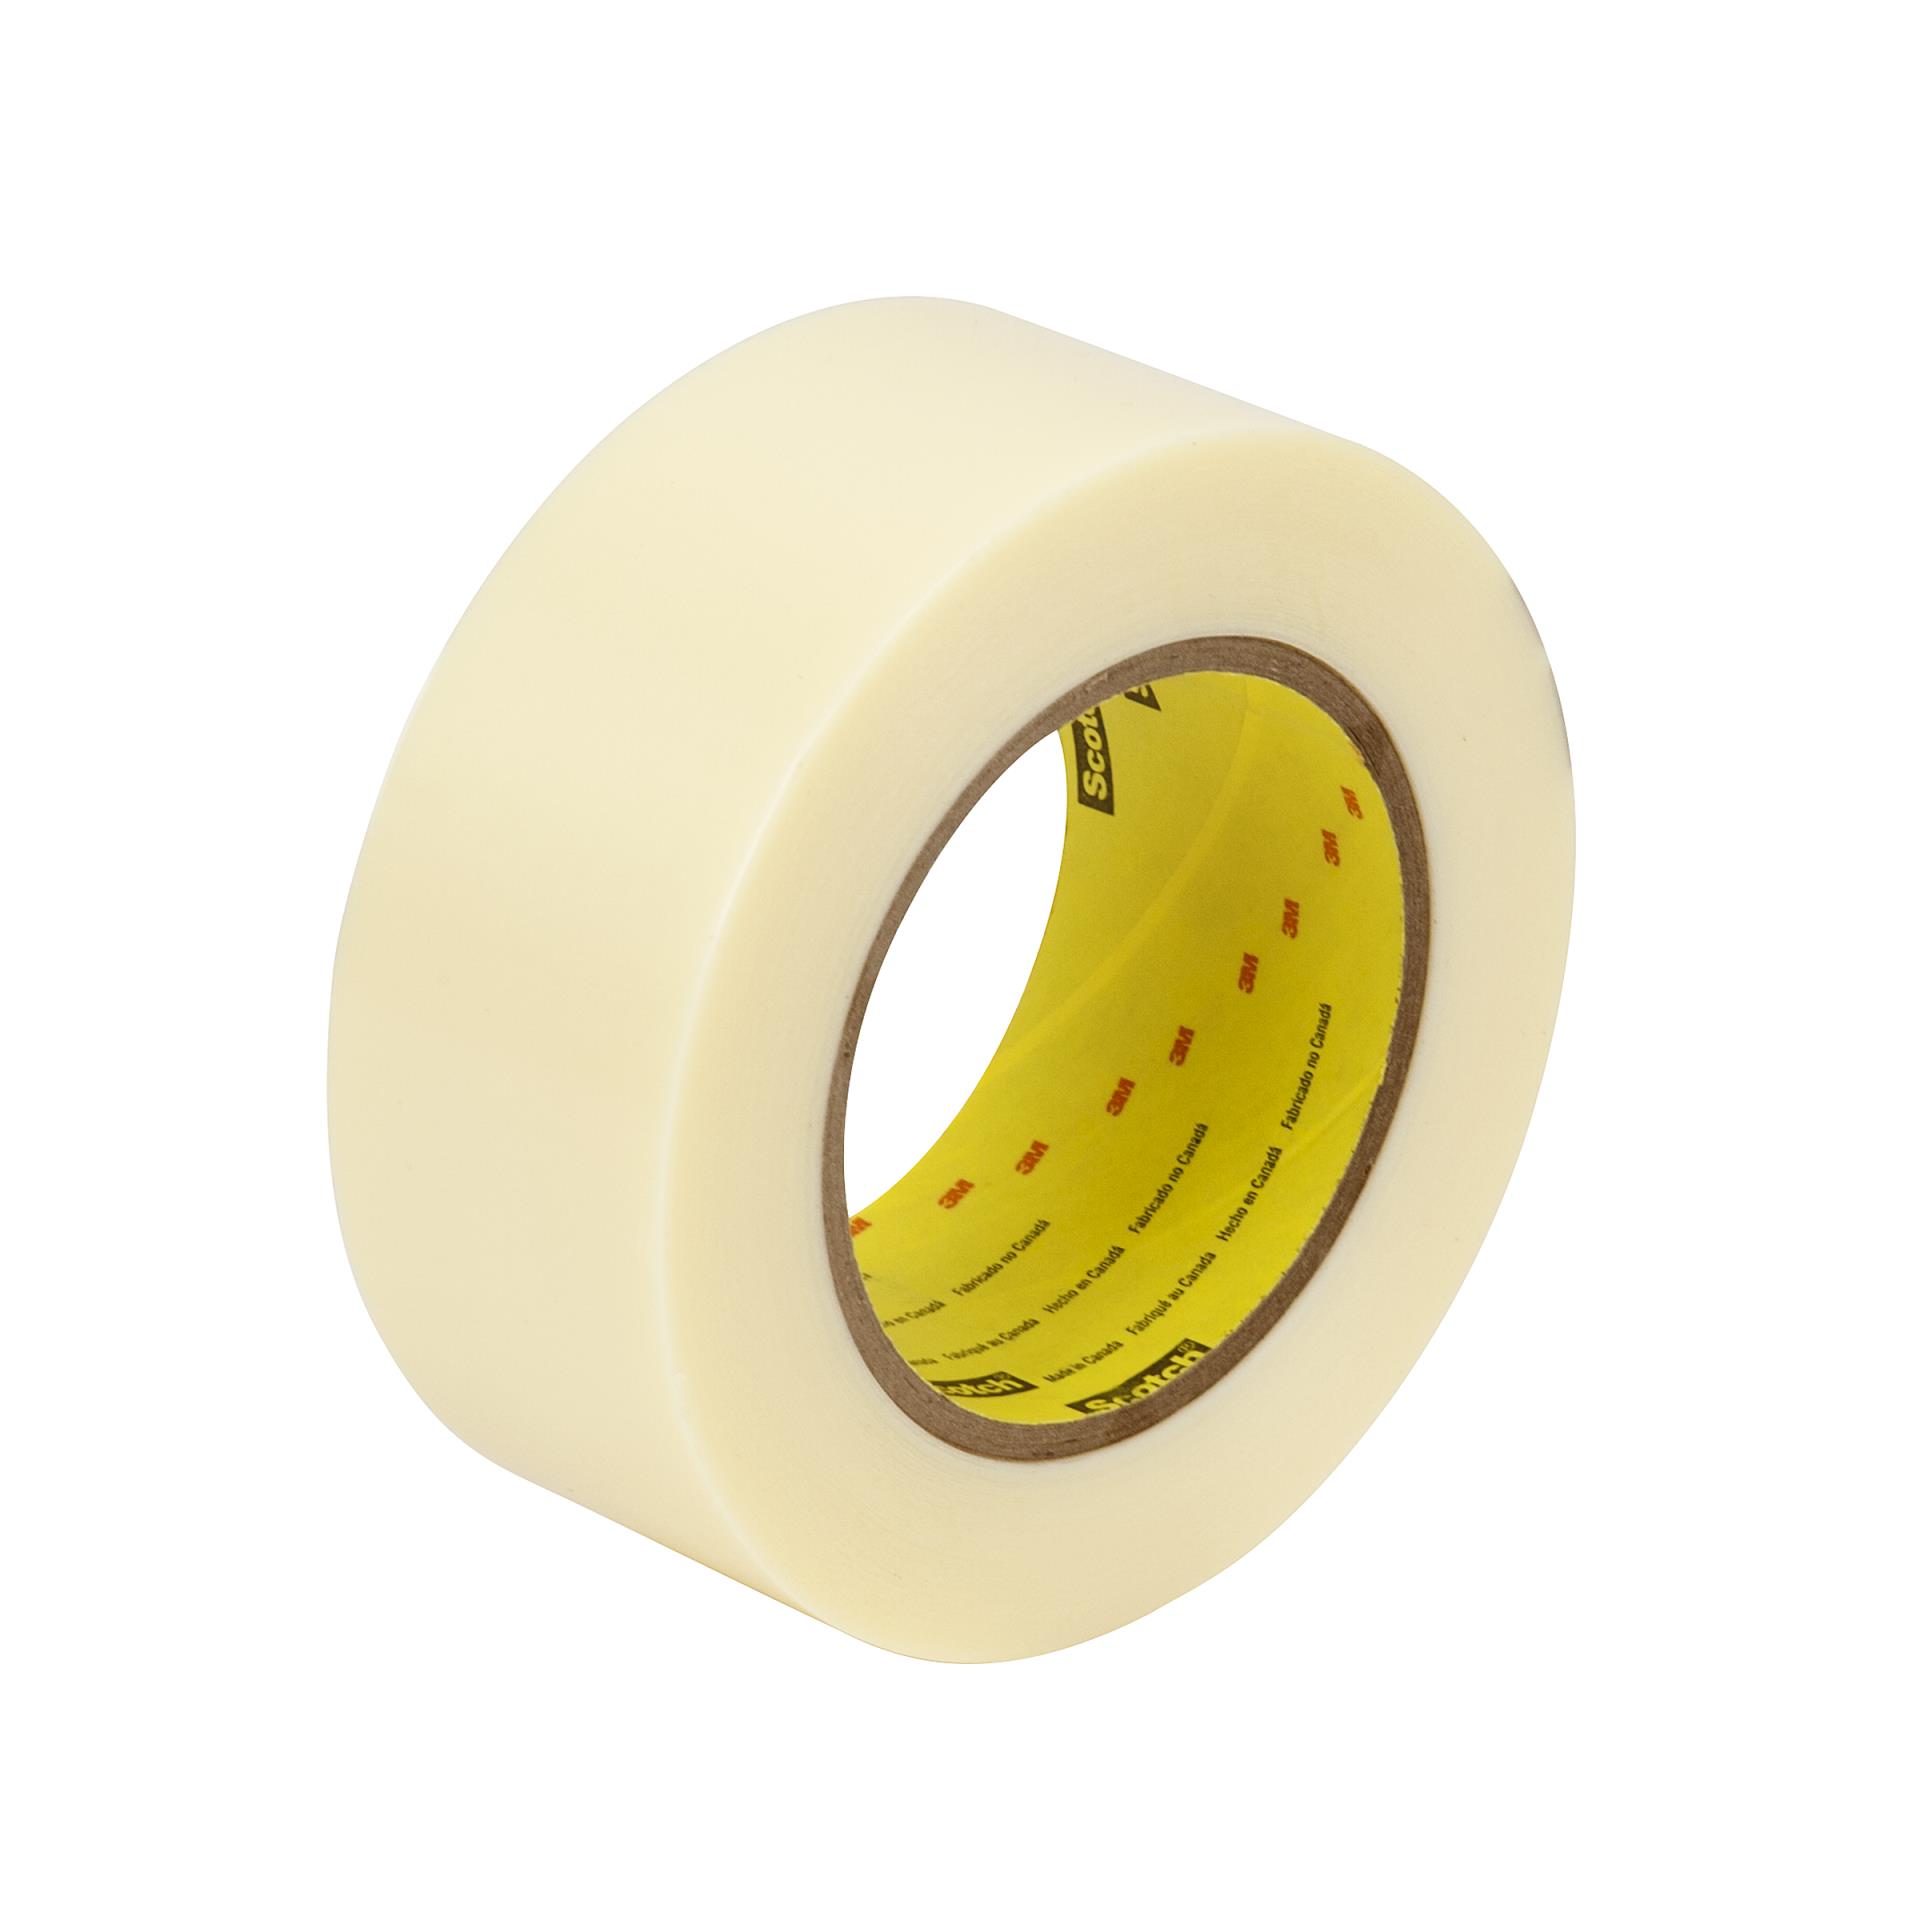 00051115559860 Scotch® Strapping Tape 8896, Ivory, 18 mm x 330 m, 16/case  Aircraft products na 6297871